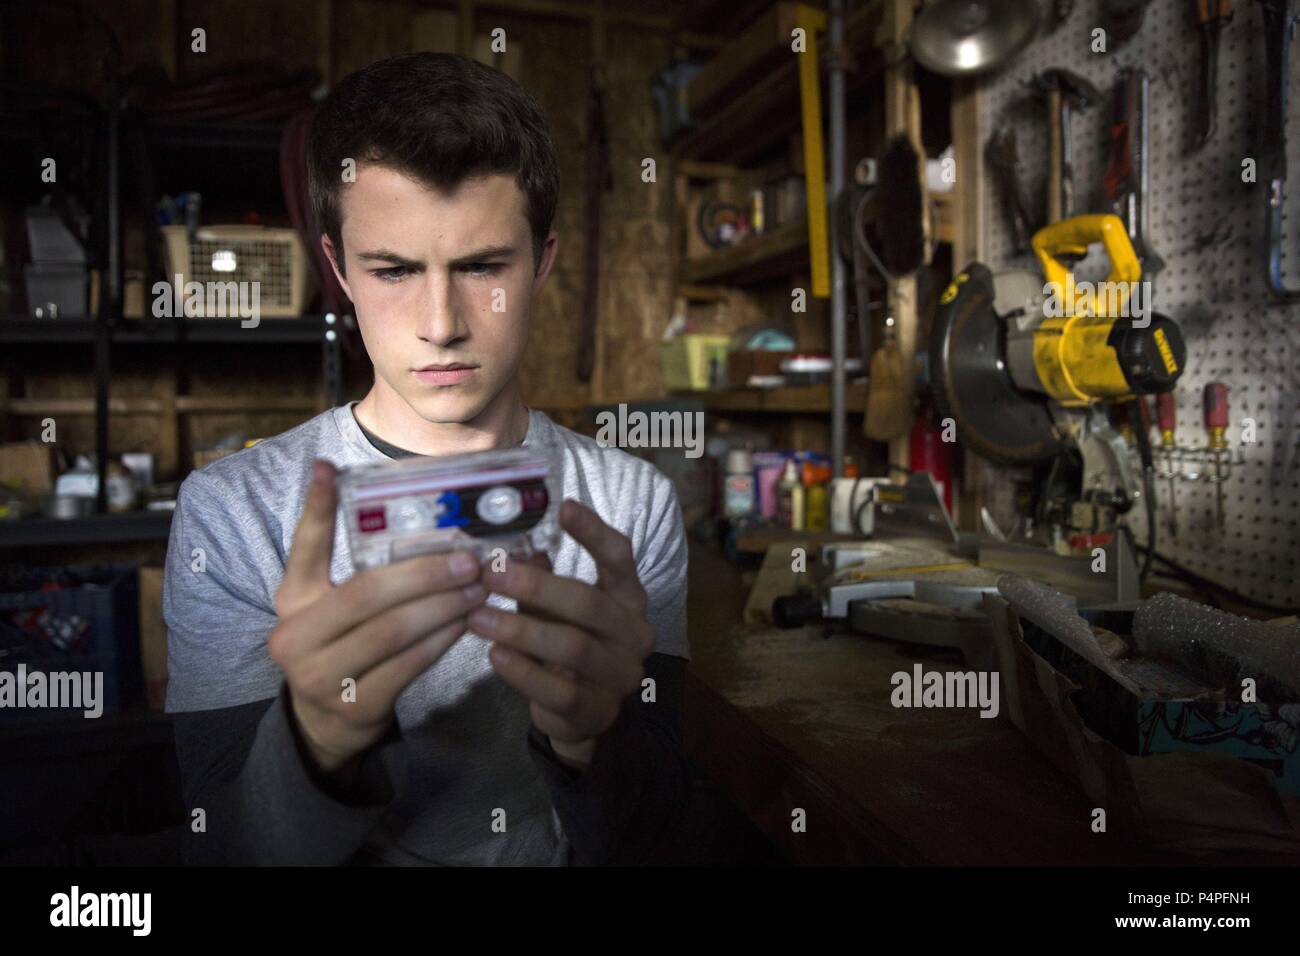 original-film-title-13-reasons-why-english-title-13-reasons-why